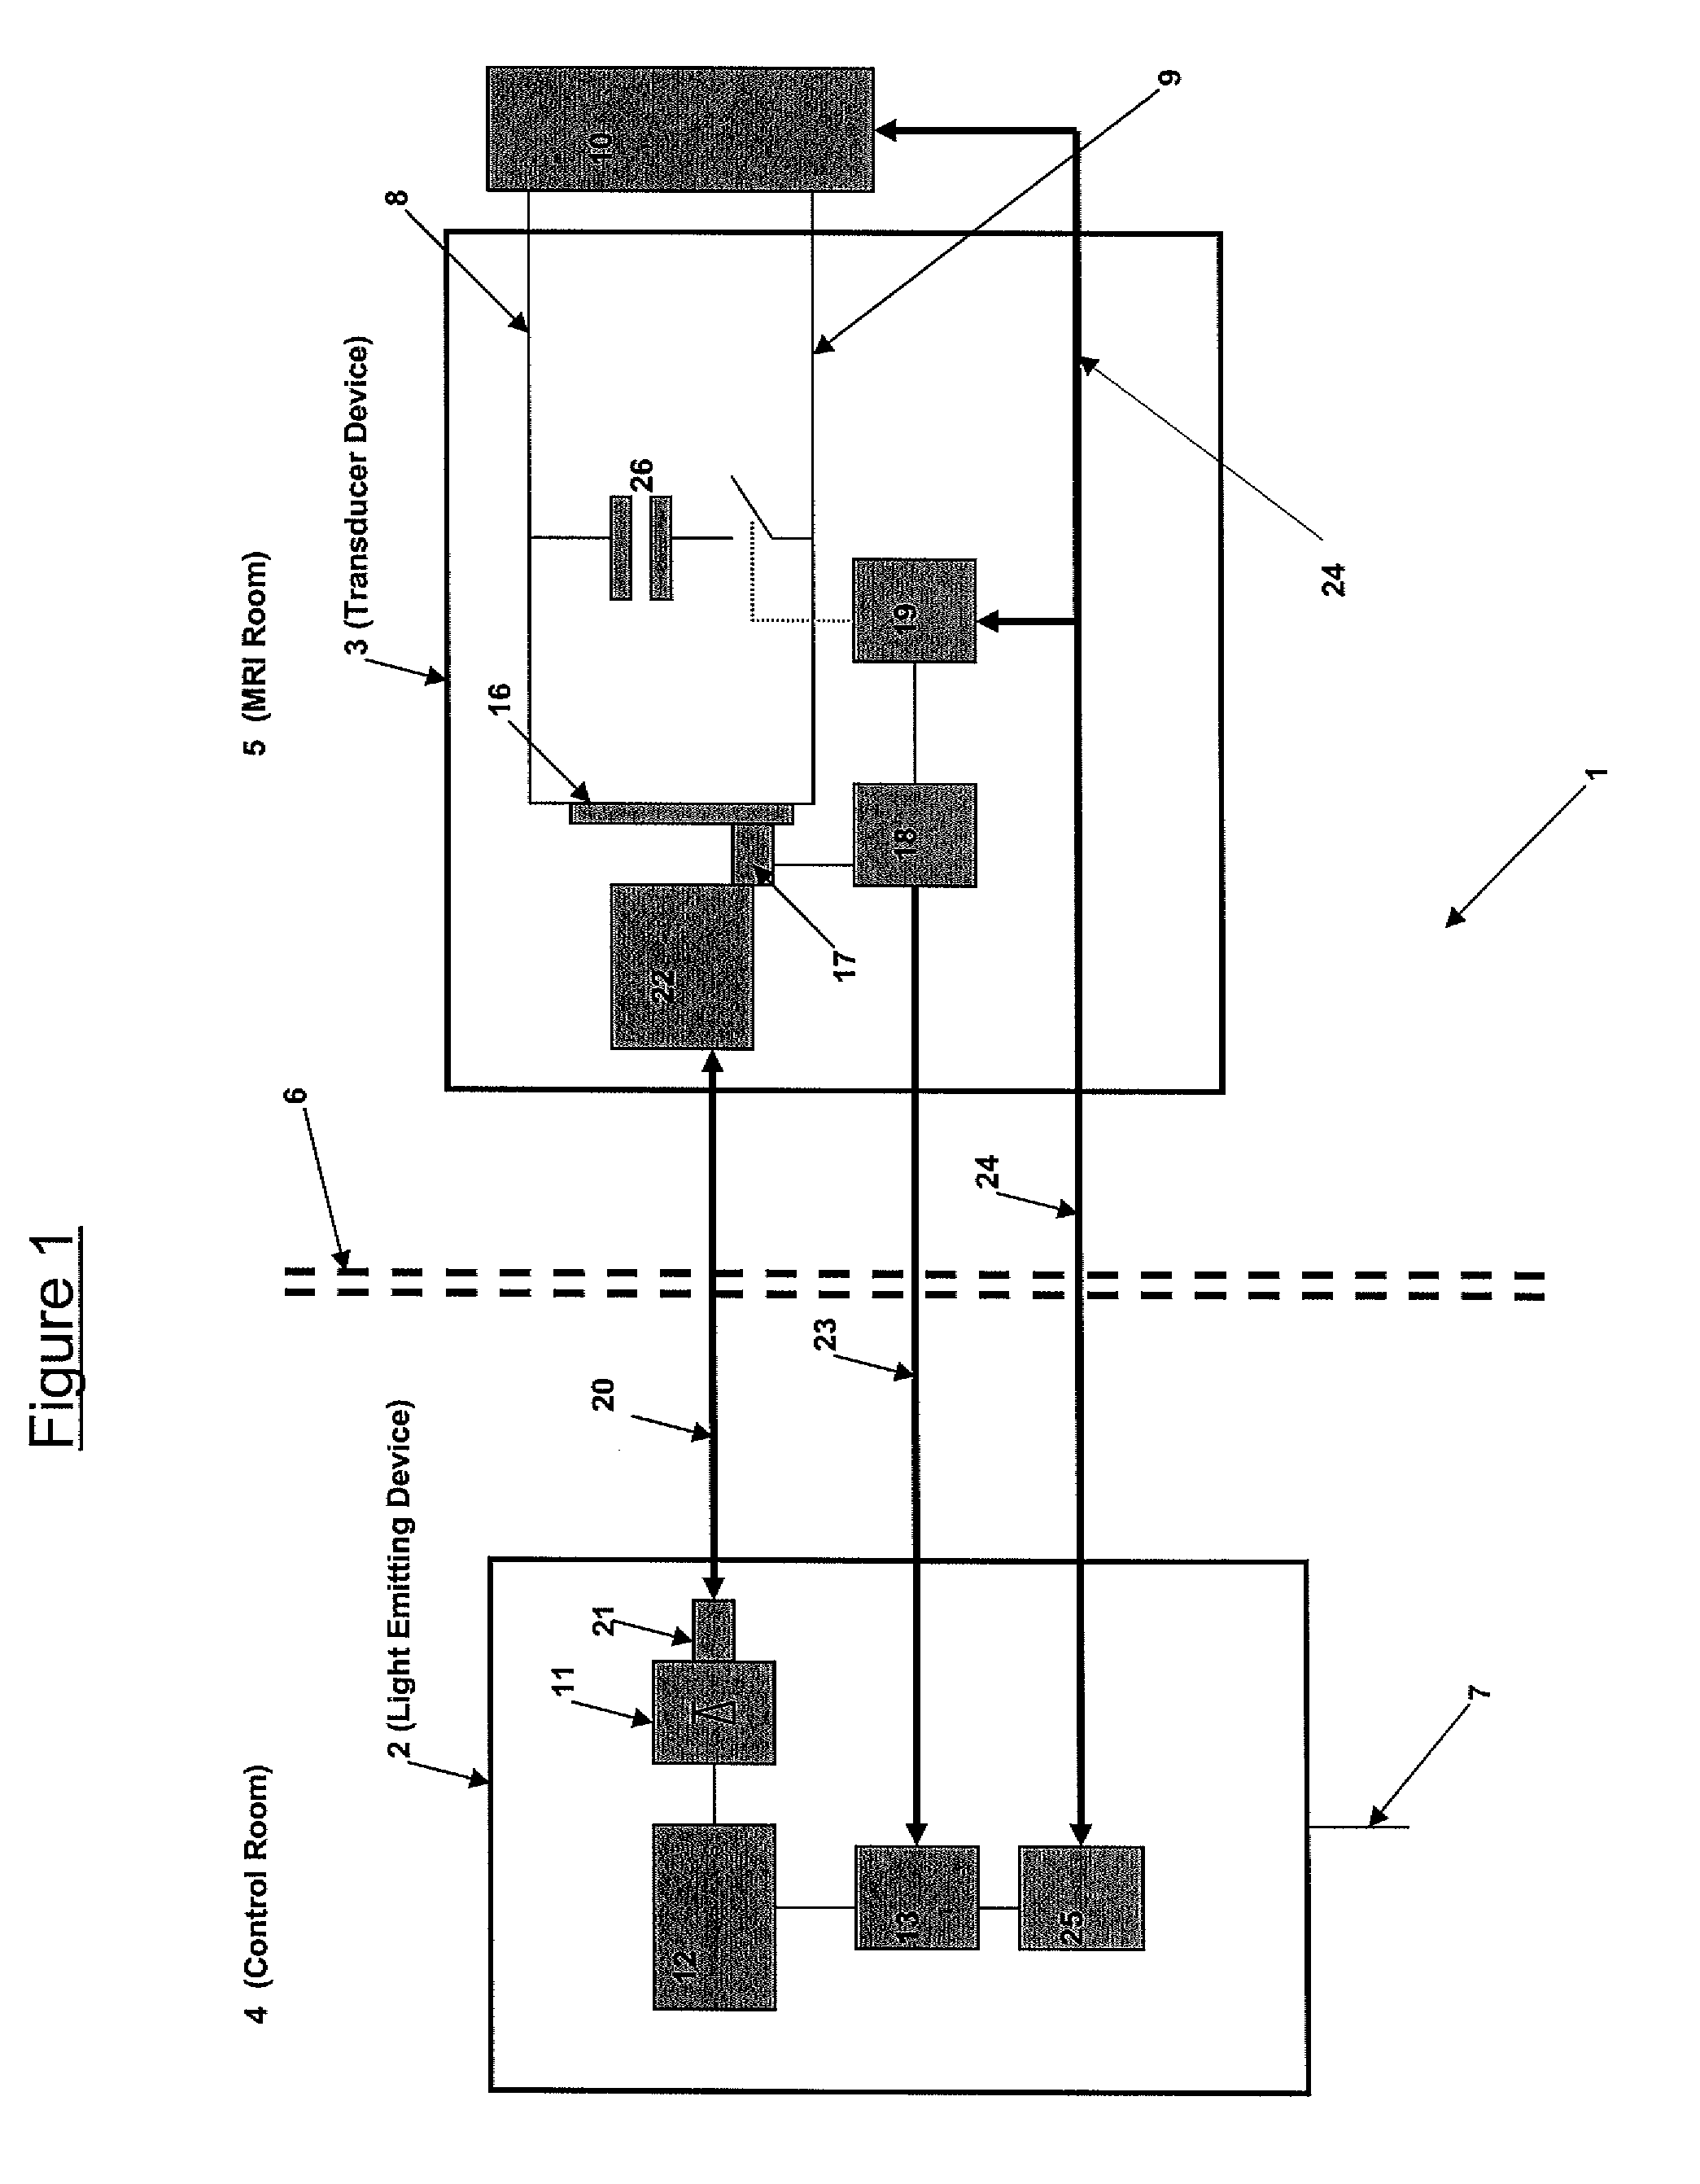 Process and system for providing electrical energy to a shielded medical imaging suite